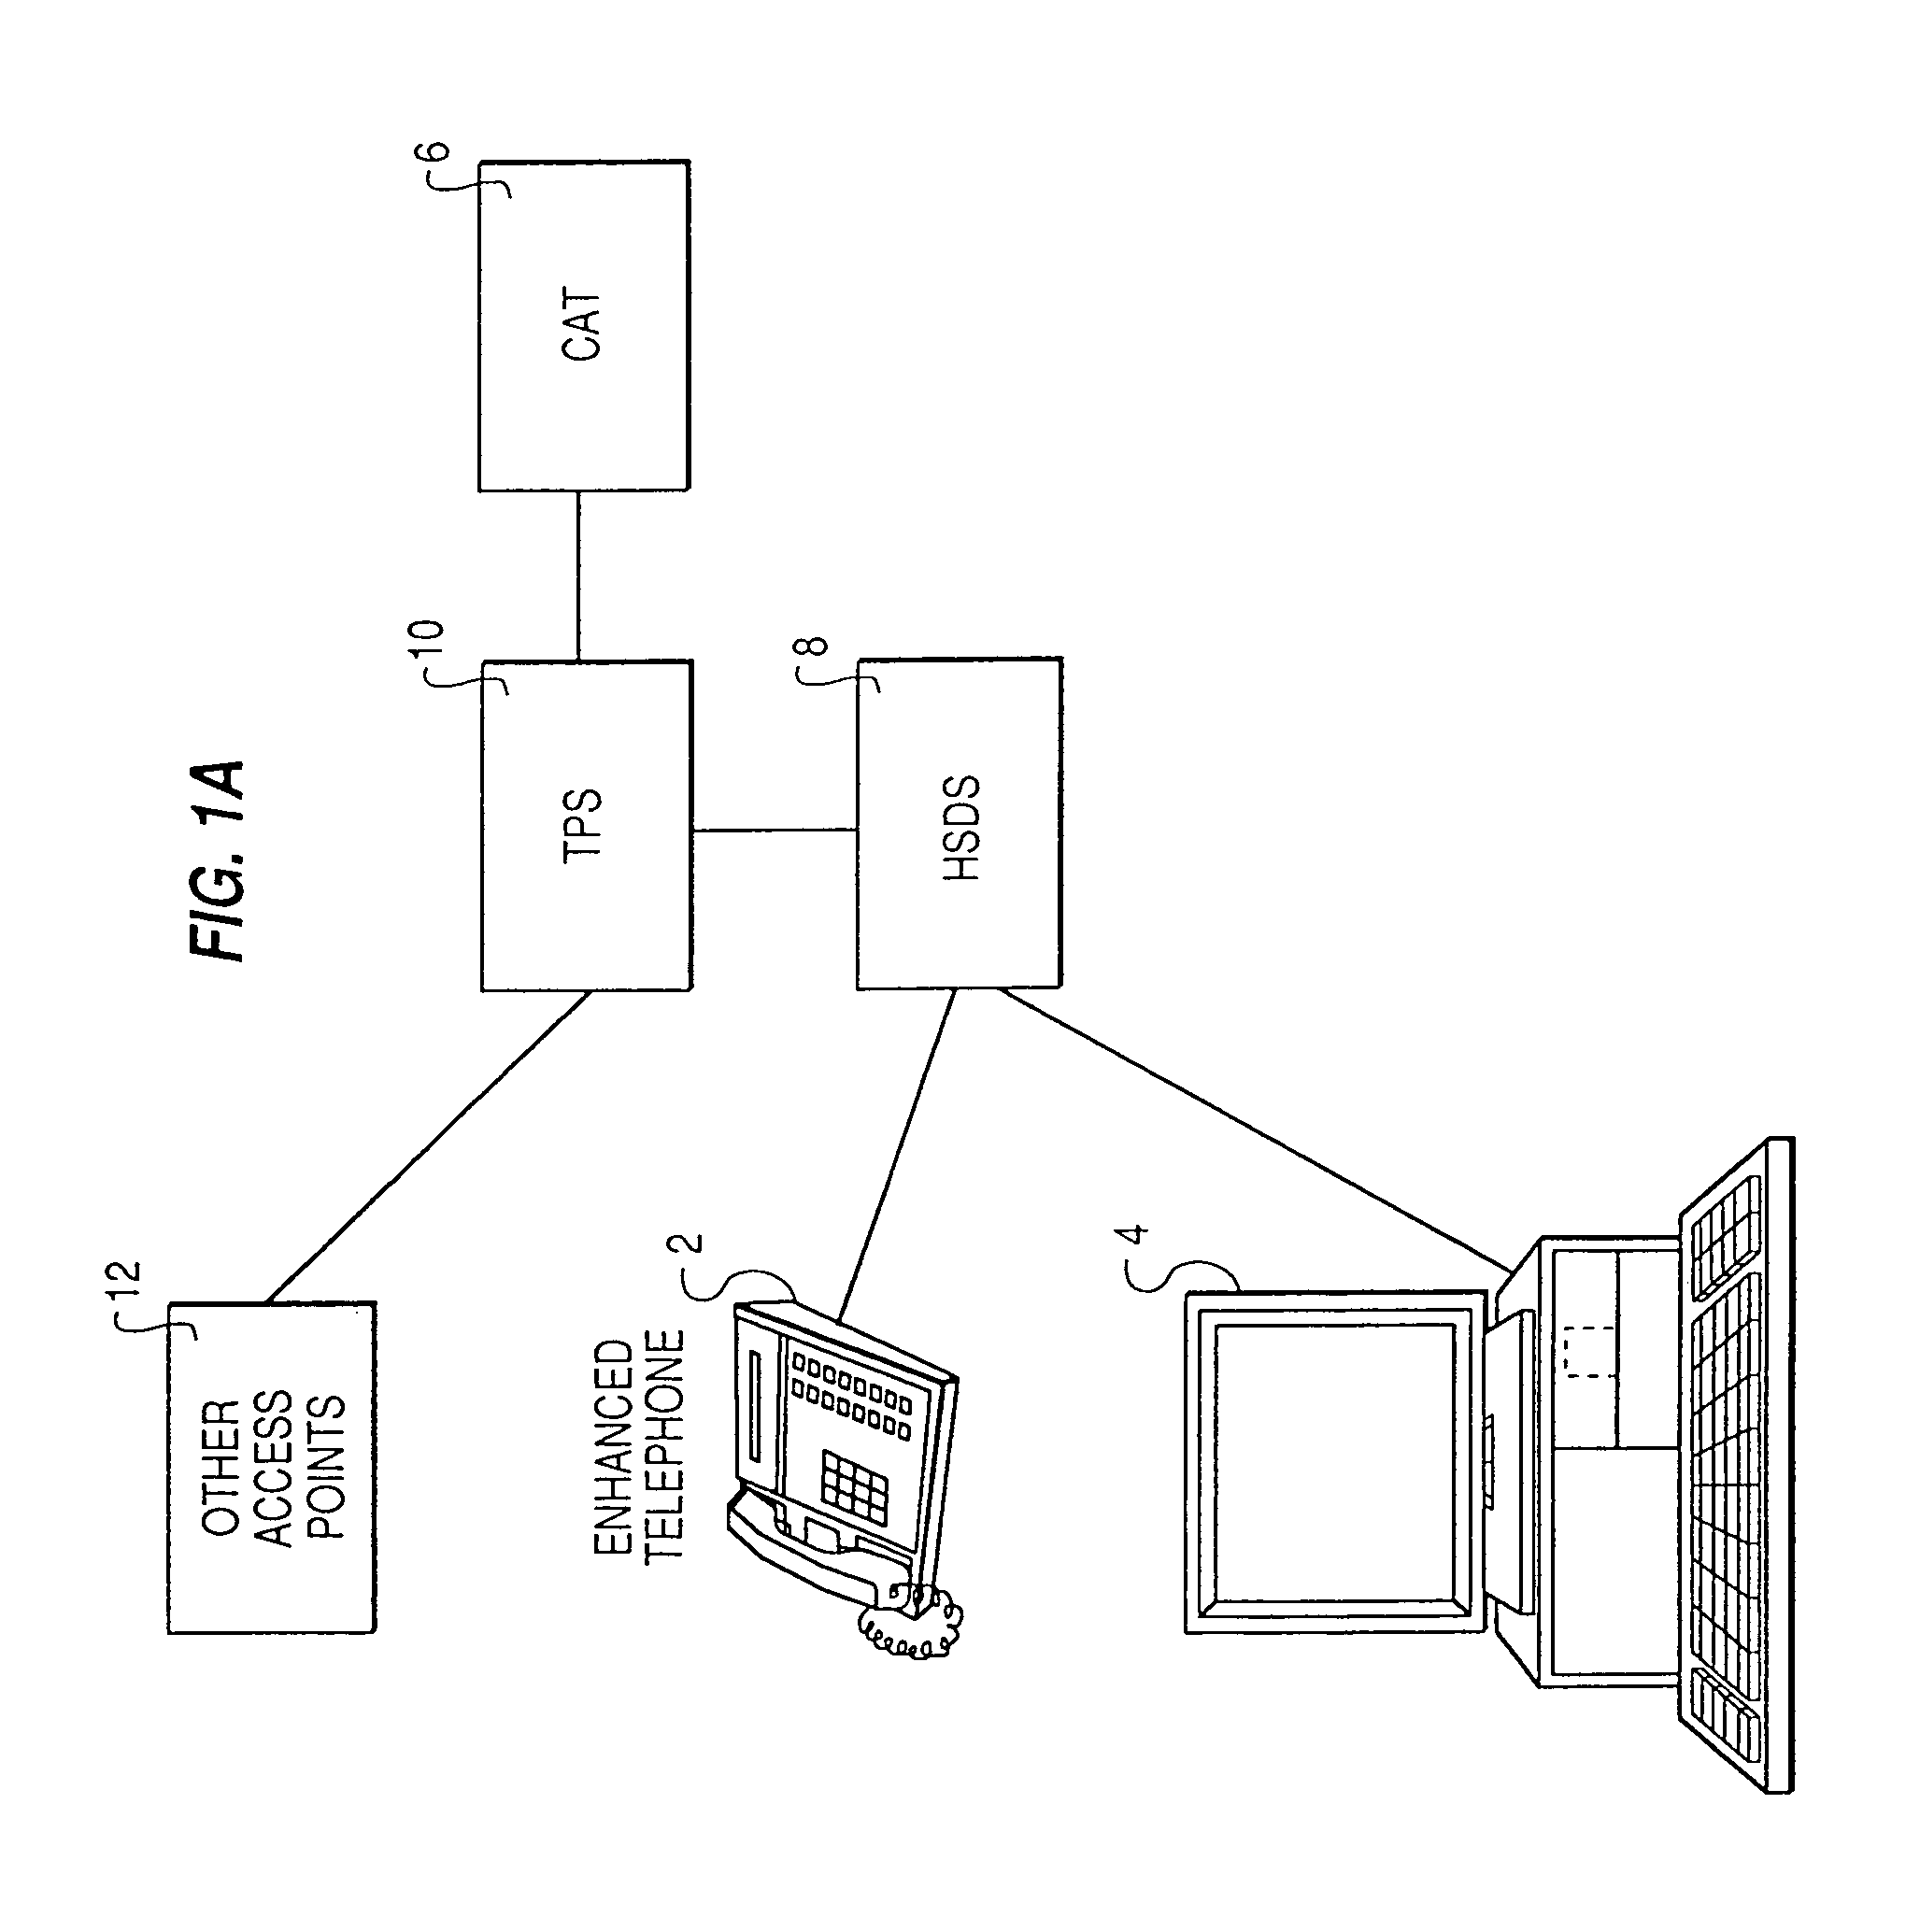 Method and system for providing integrated brokerage and other financial services through customer activated terminals